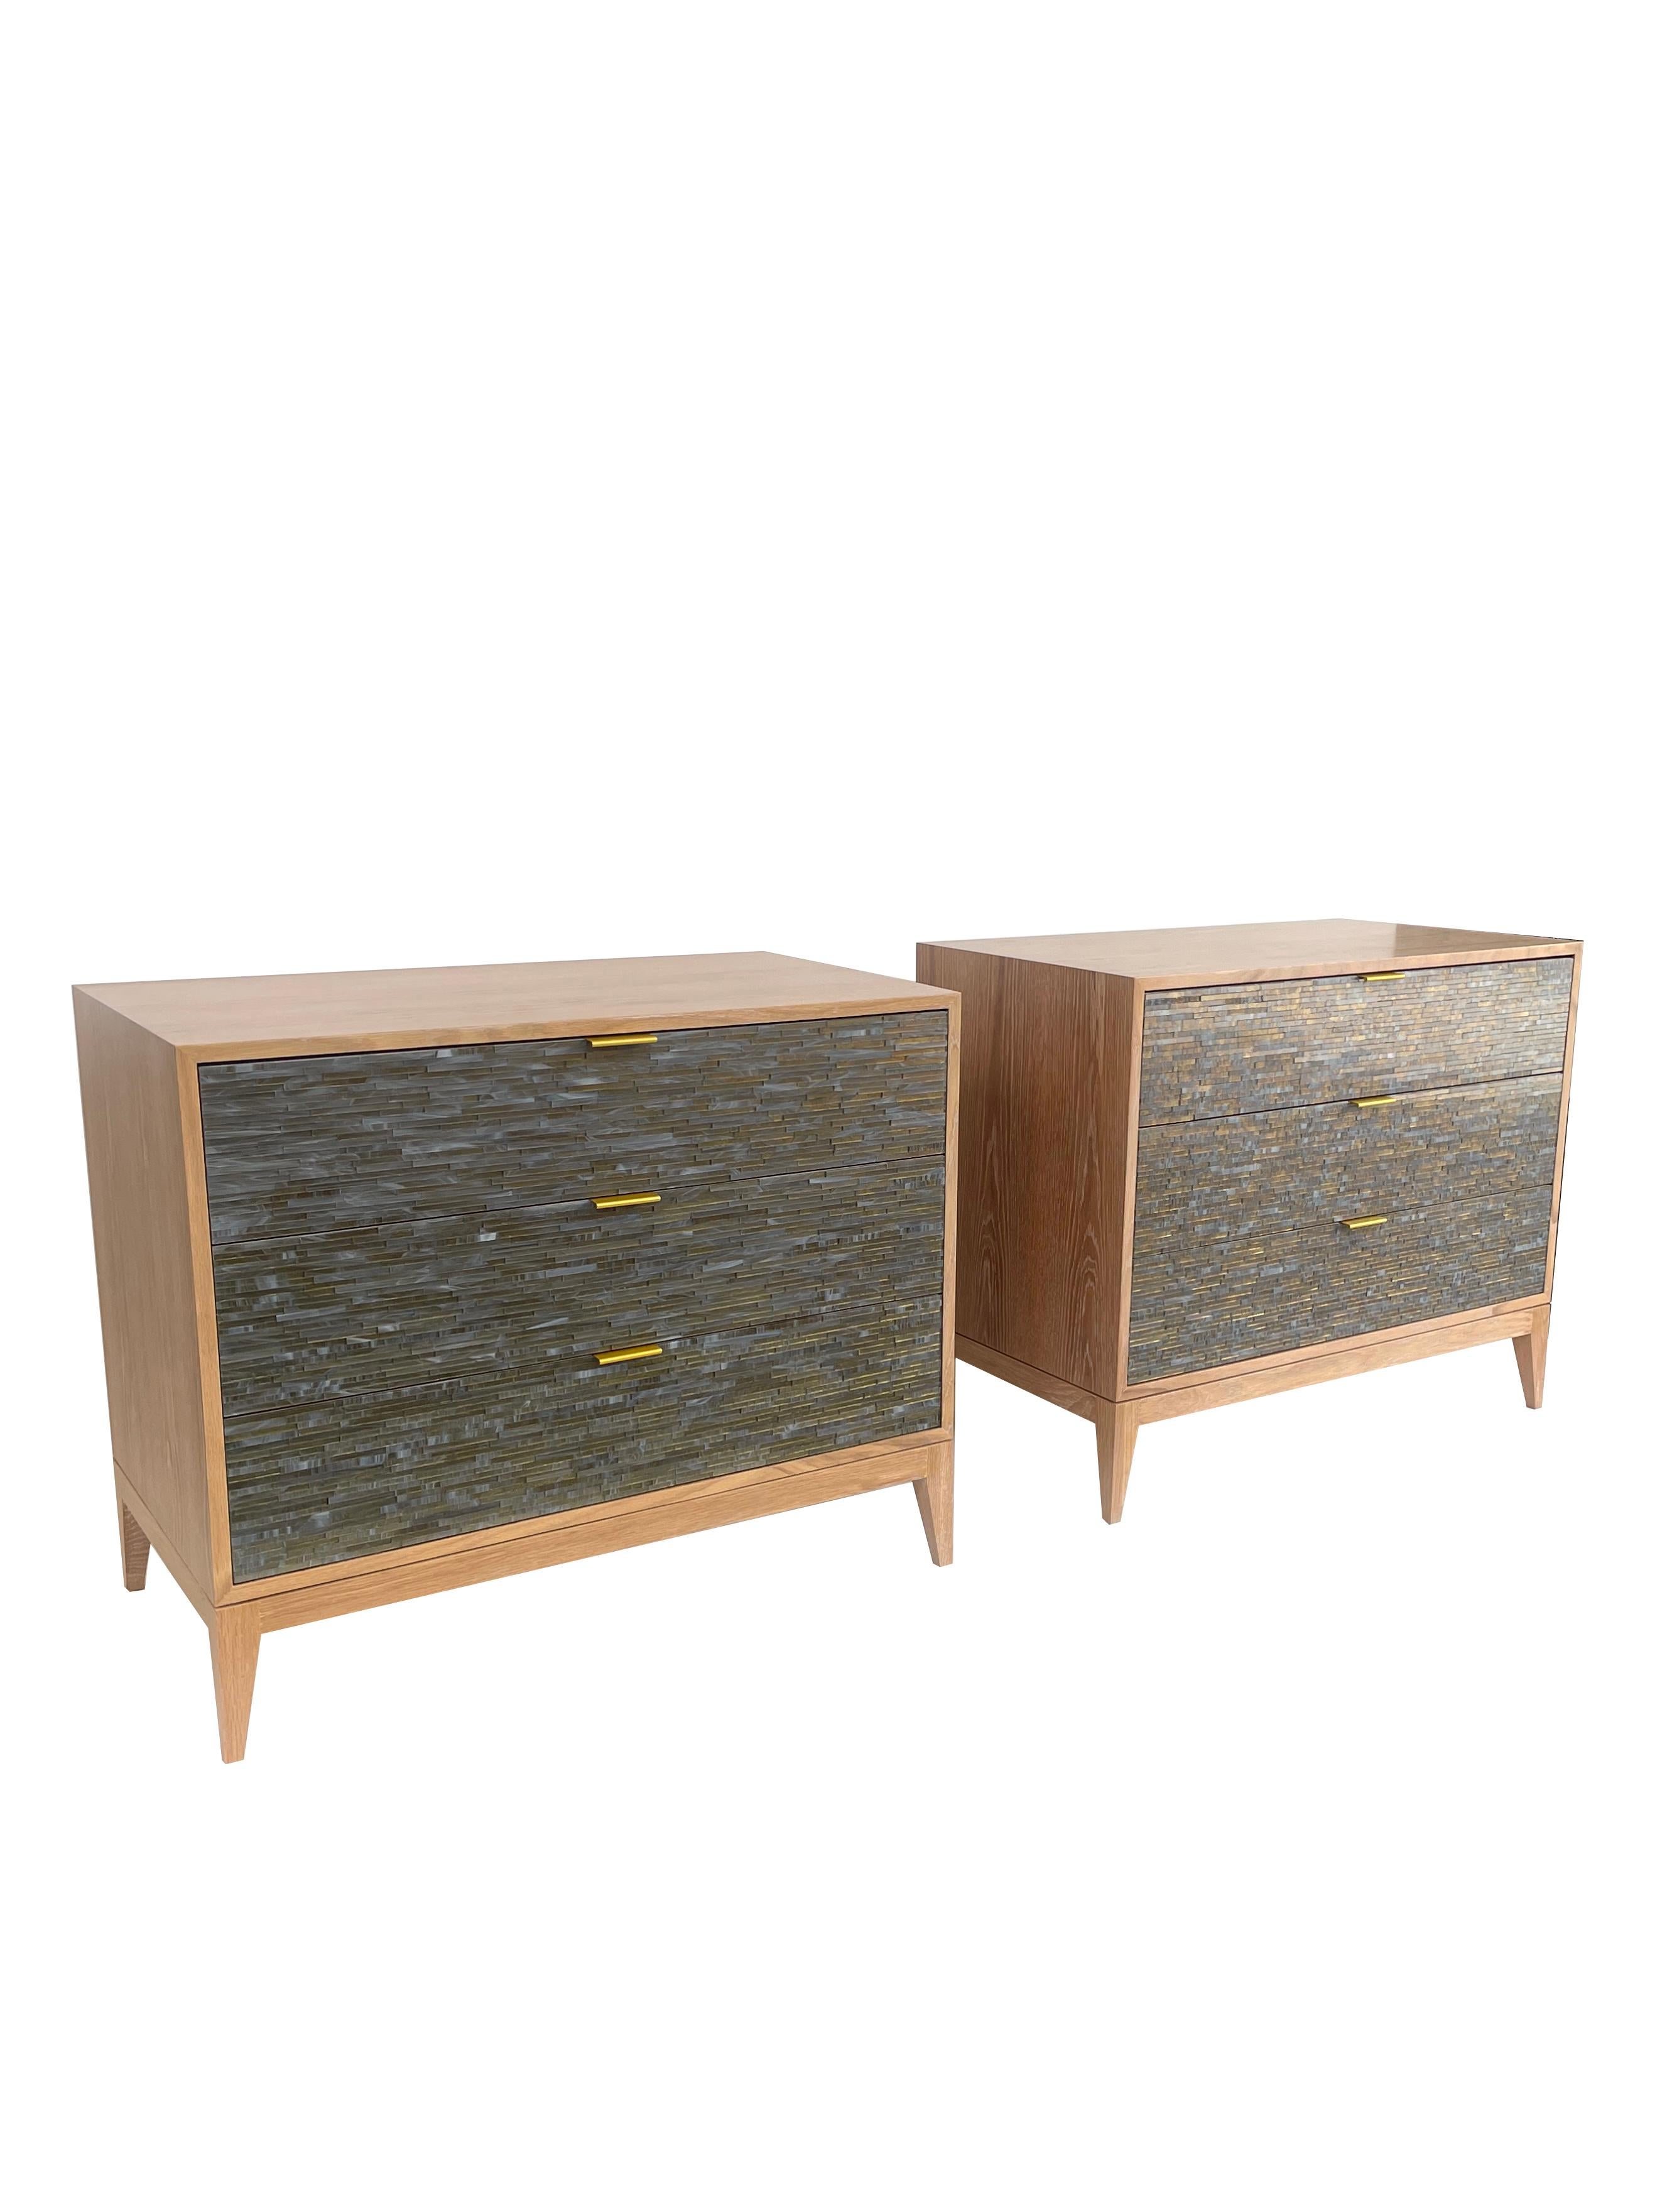 Introducing the Milano 3-Drawer Nightstand with Wispy Grey Gold Mosaic. Hand crafted with the utmost attention to detail, this exquisite piece features sleek wooden Milano legs in a Natural Oak finish. The nightstand's drawers feature a mosaic in